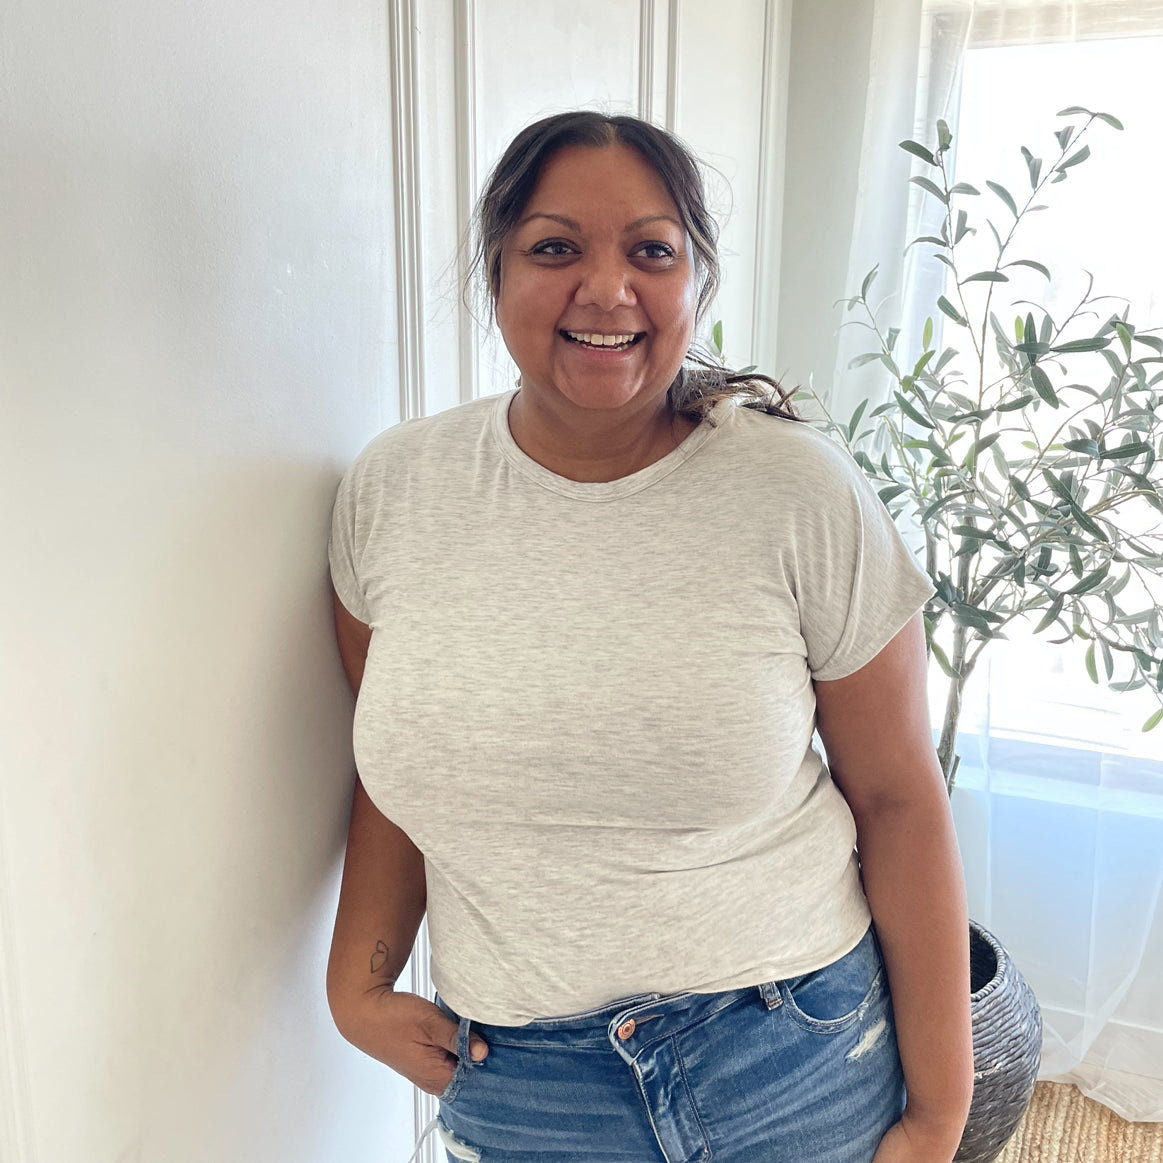 indian woman smiling wearing a light grey crewneck t-shirt and light wash jeans